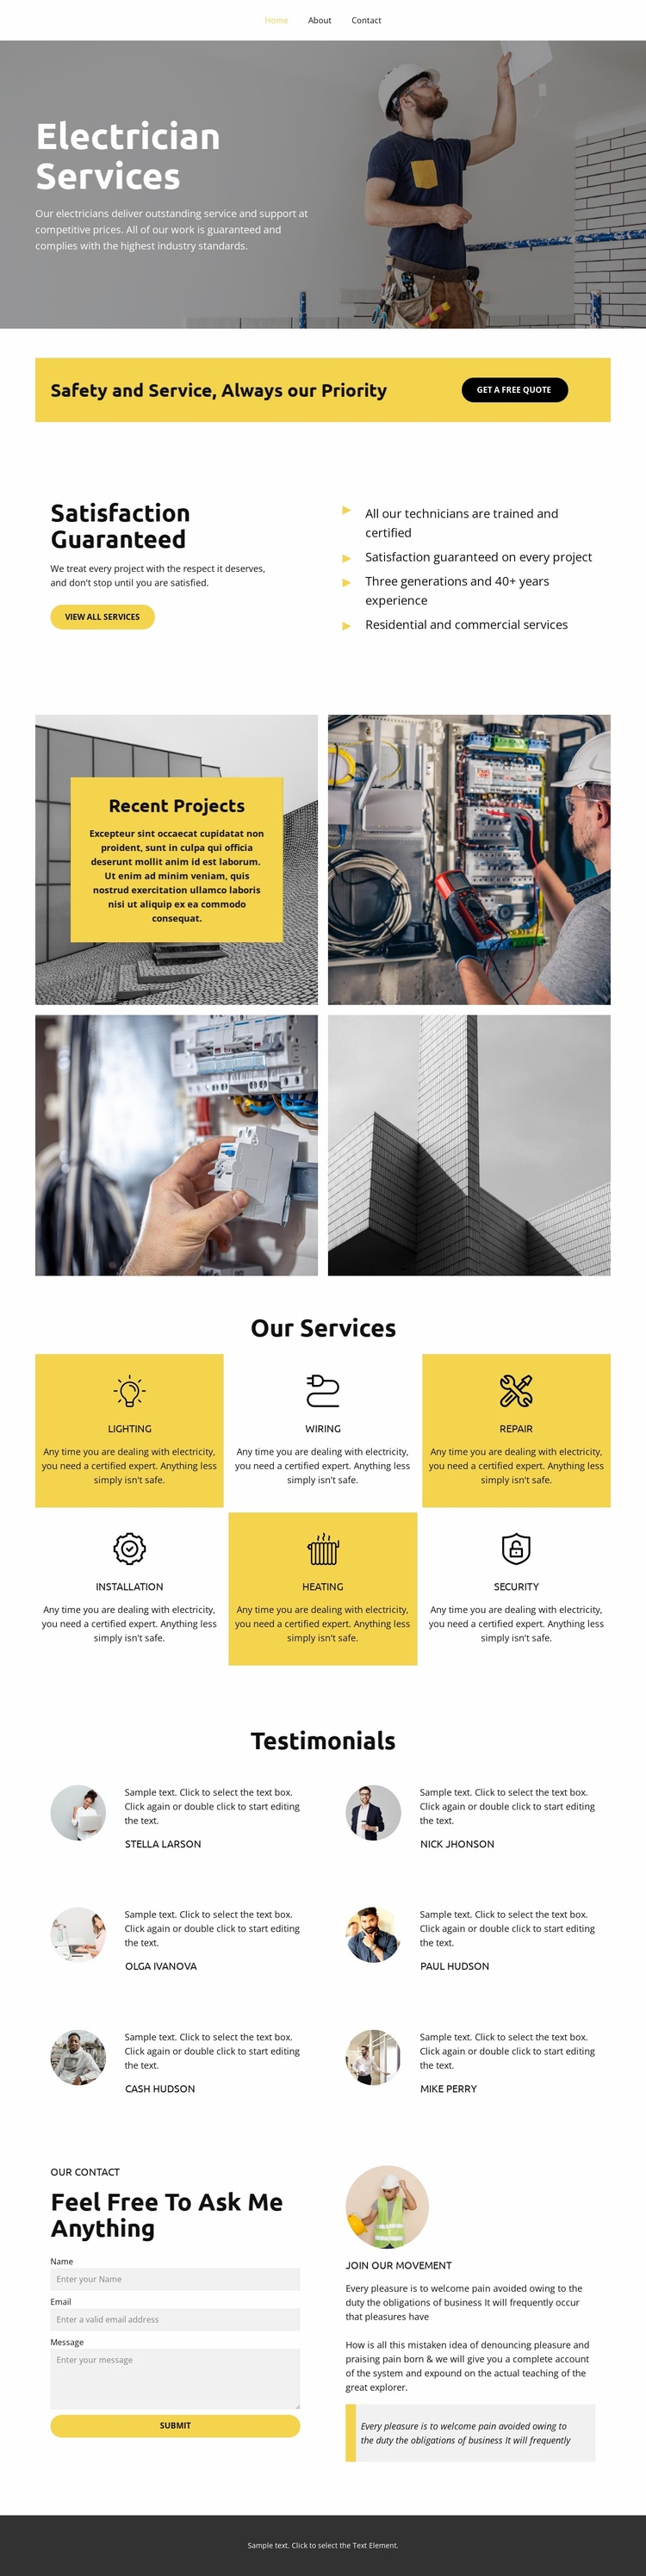 Electrician Services Landing Page